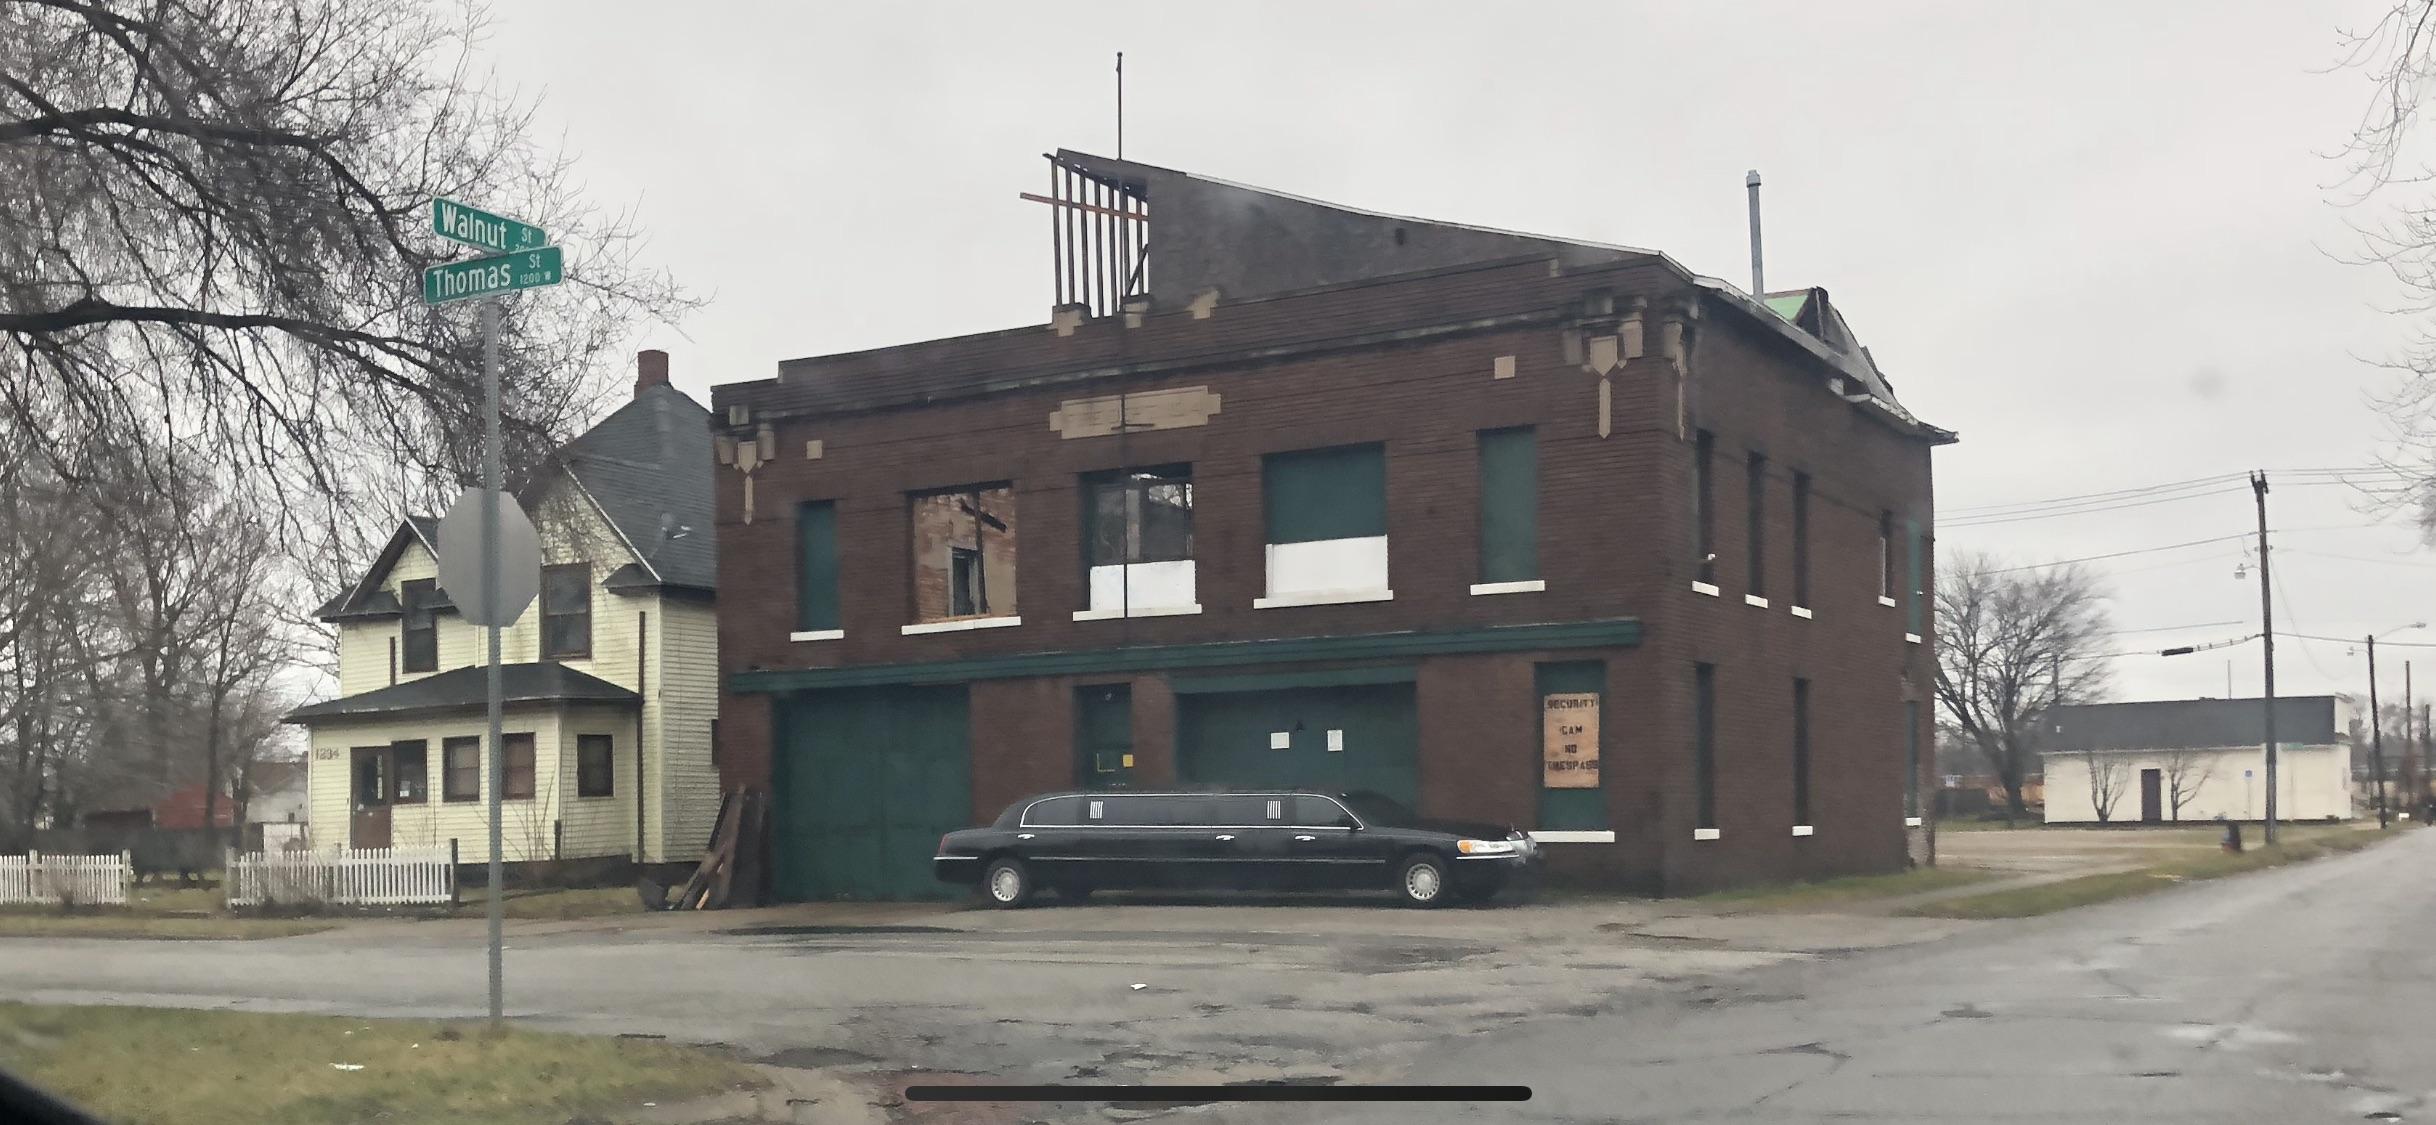 This limo in front of an abandoned building : mildlyinteresting